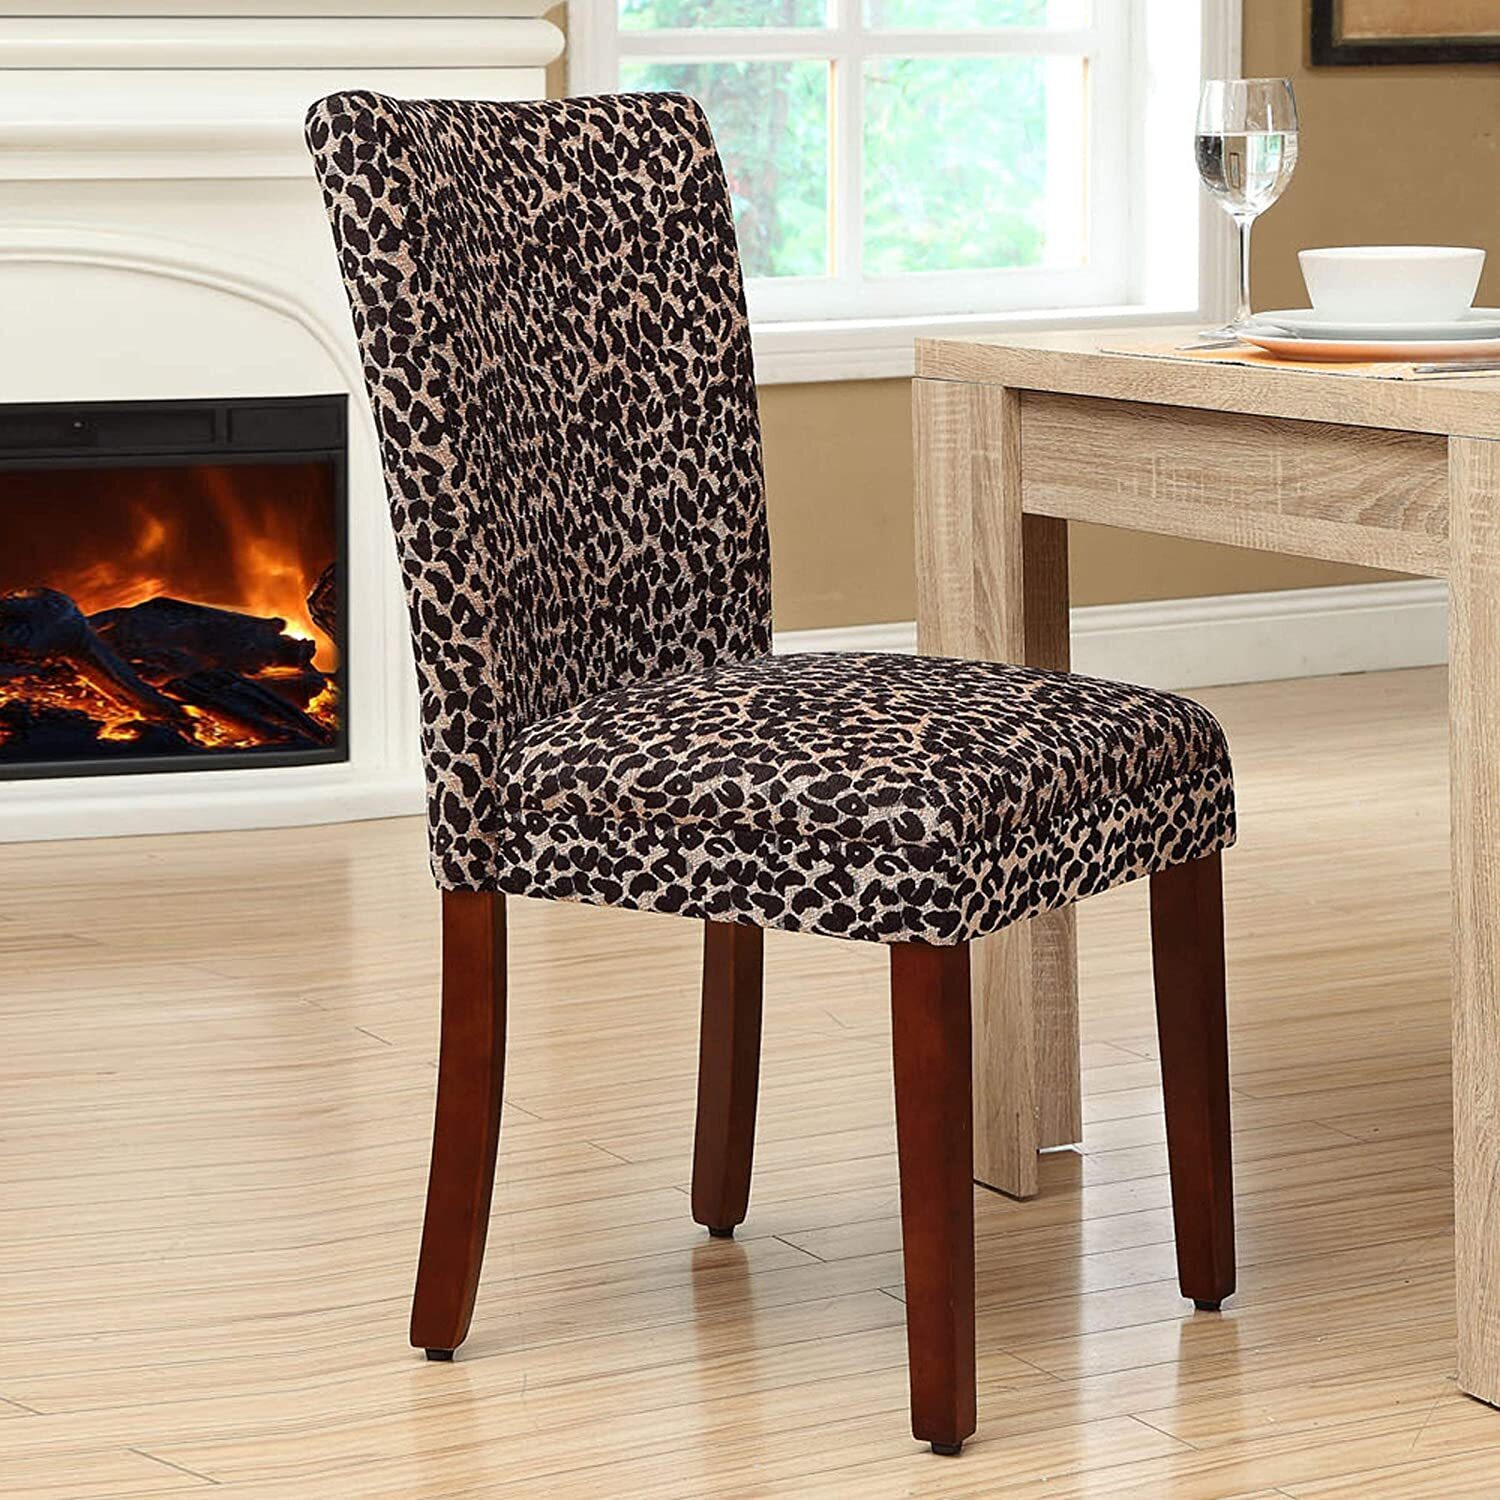 Set of Two Modern Highback Leopard Print Dining Chairs